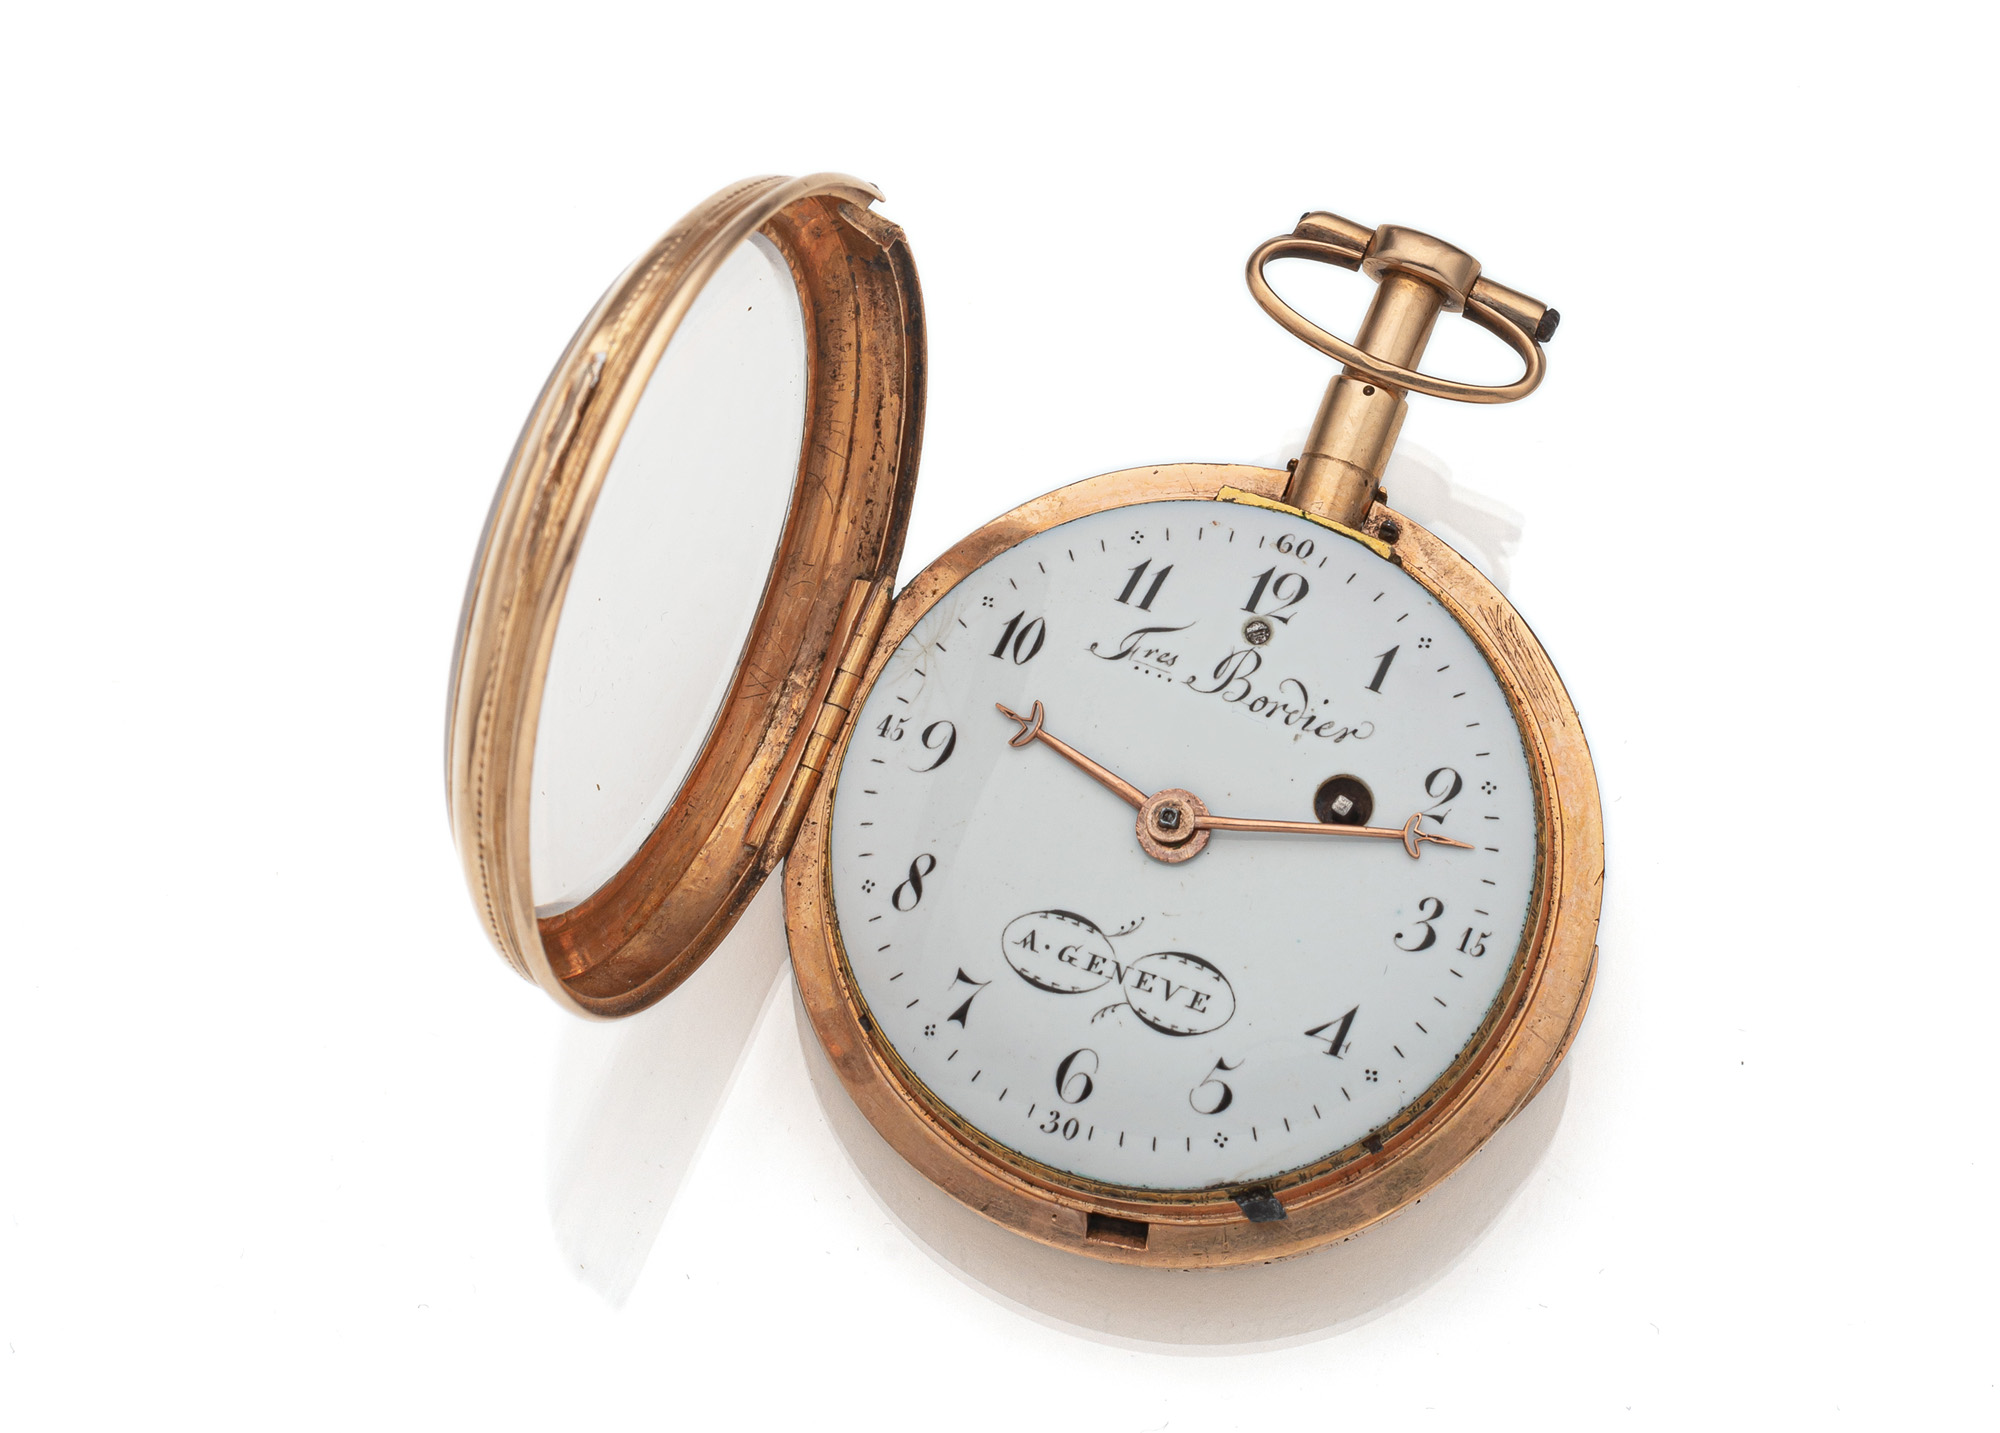 A GOLD POCKET WATCH WITH QUARTER REPETITION - Image 2 of 4